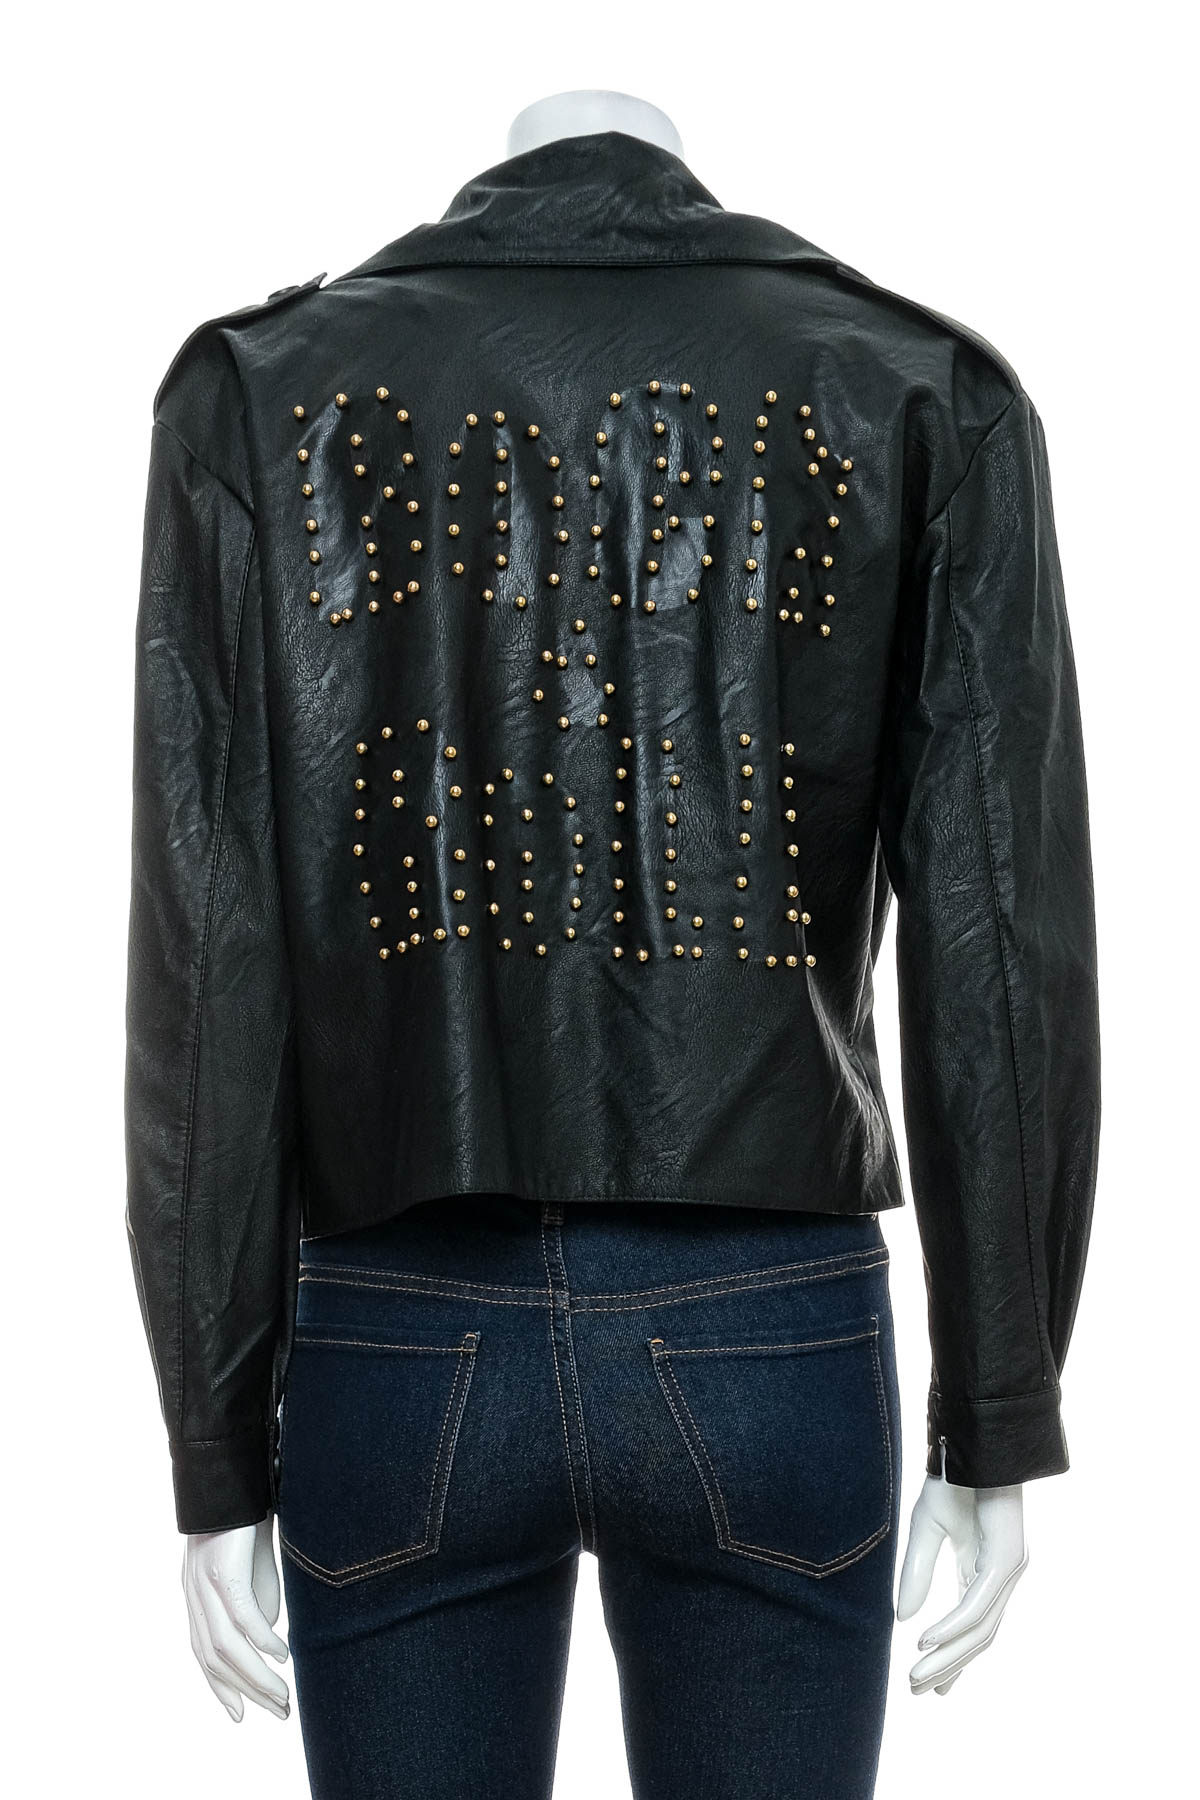 Women's leather jacket - VIC BEE - 1